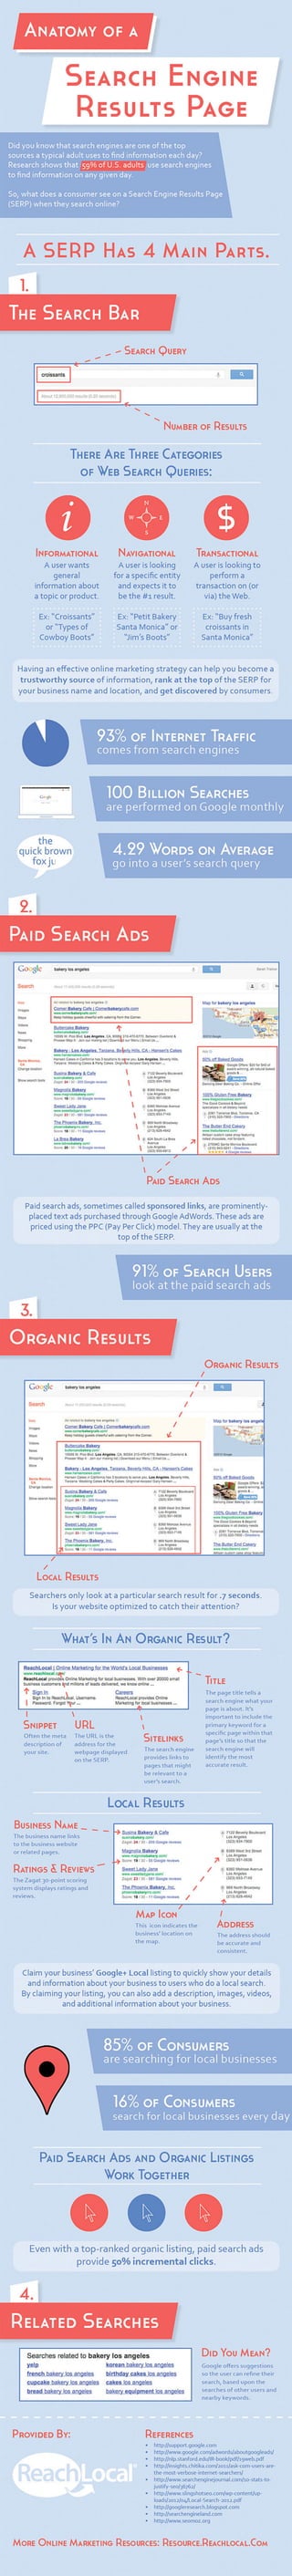 Anatomy of a Search Engine Results Page Infographic